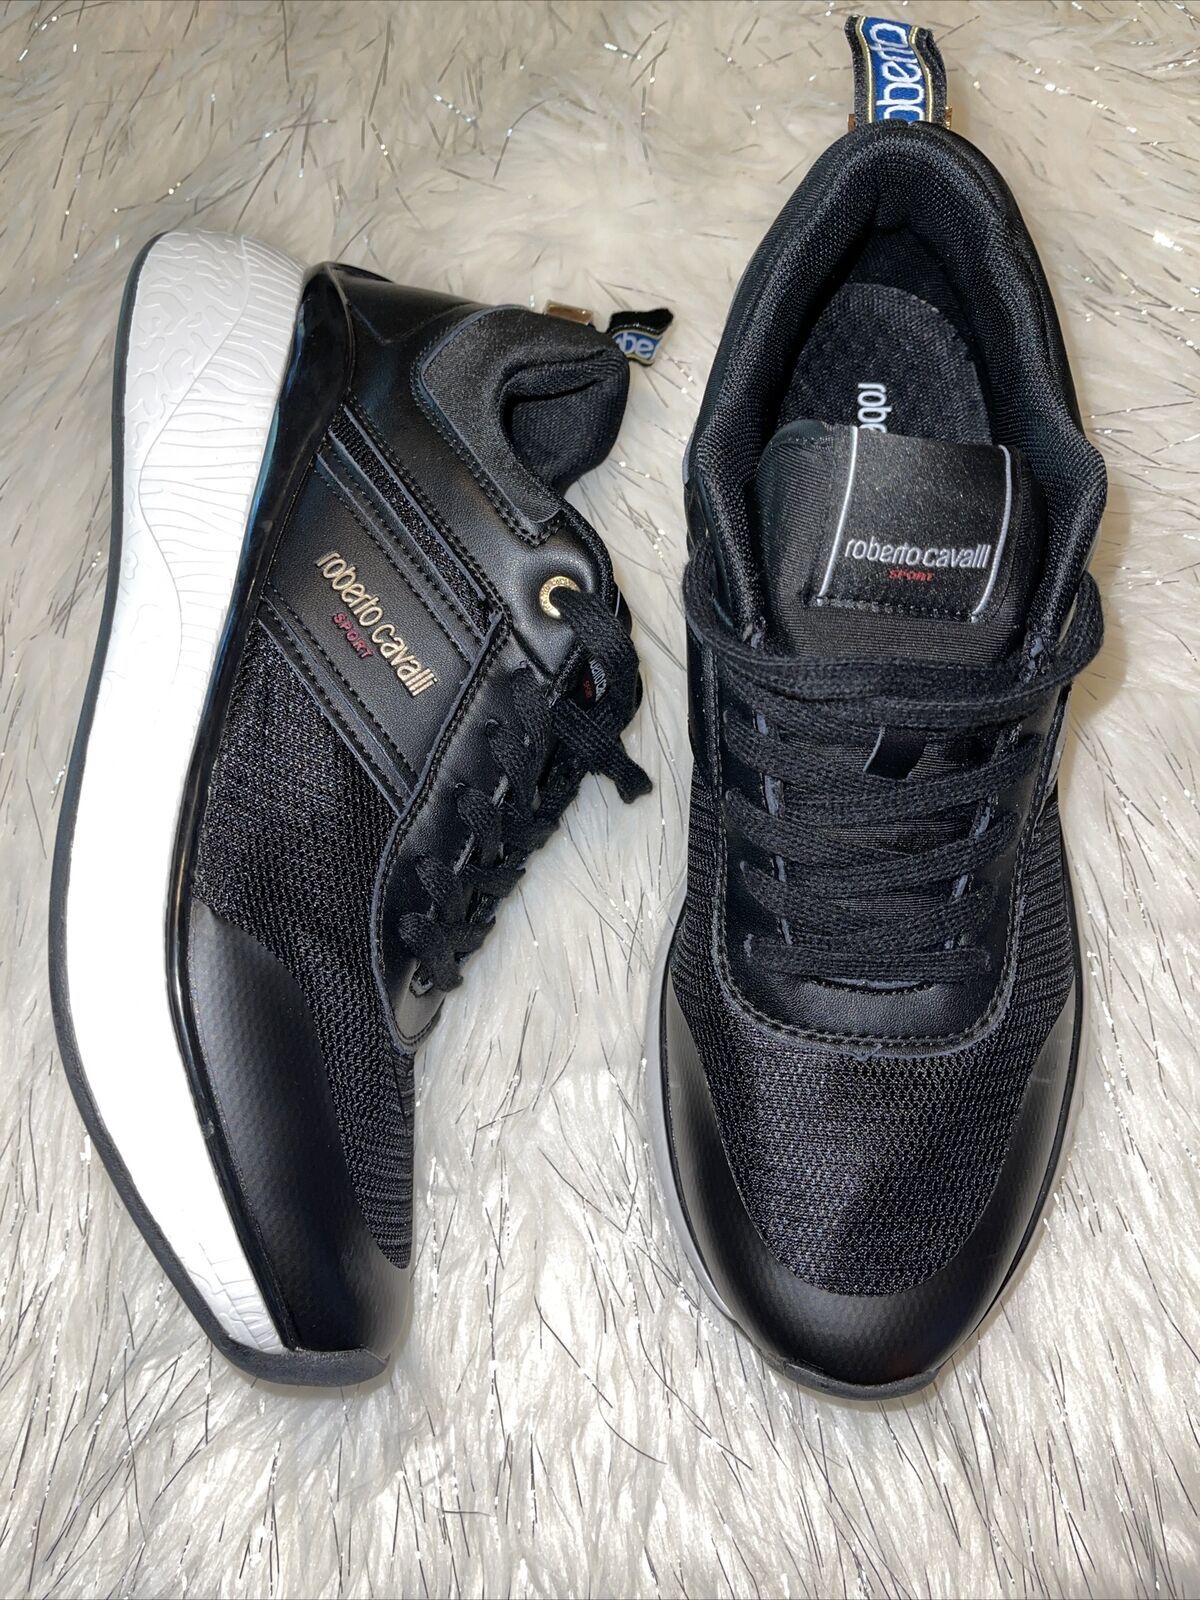 Roberto Cavalli Sports Sneakers Lace Up Shoes Black New sz 43 us 10 new $579 - $550.37